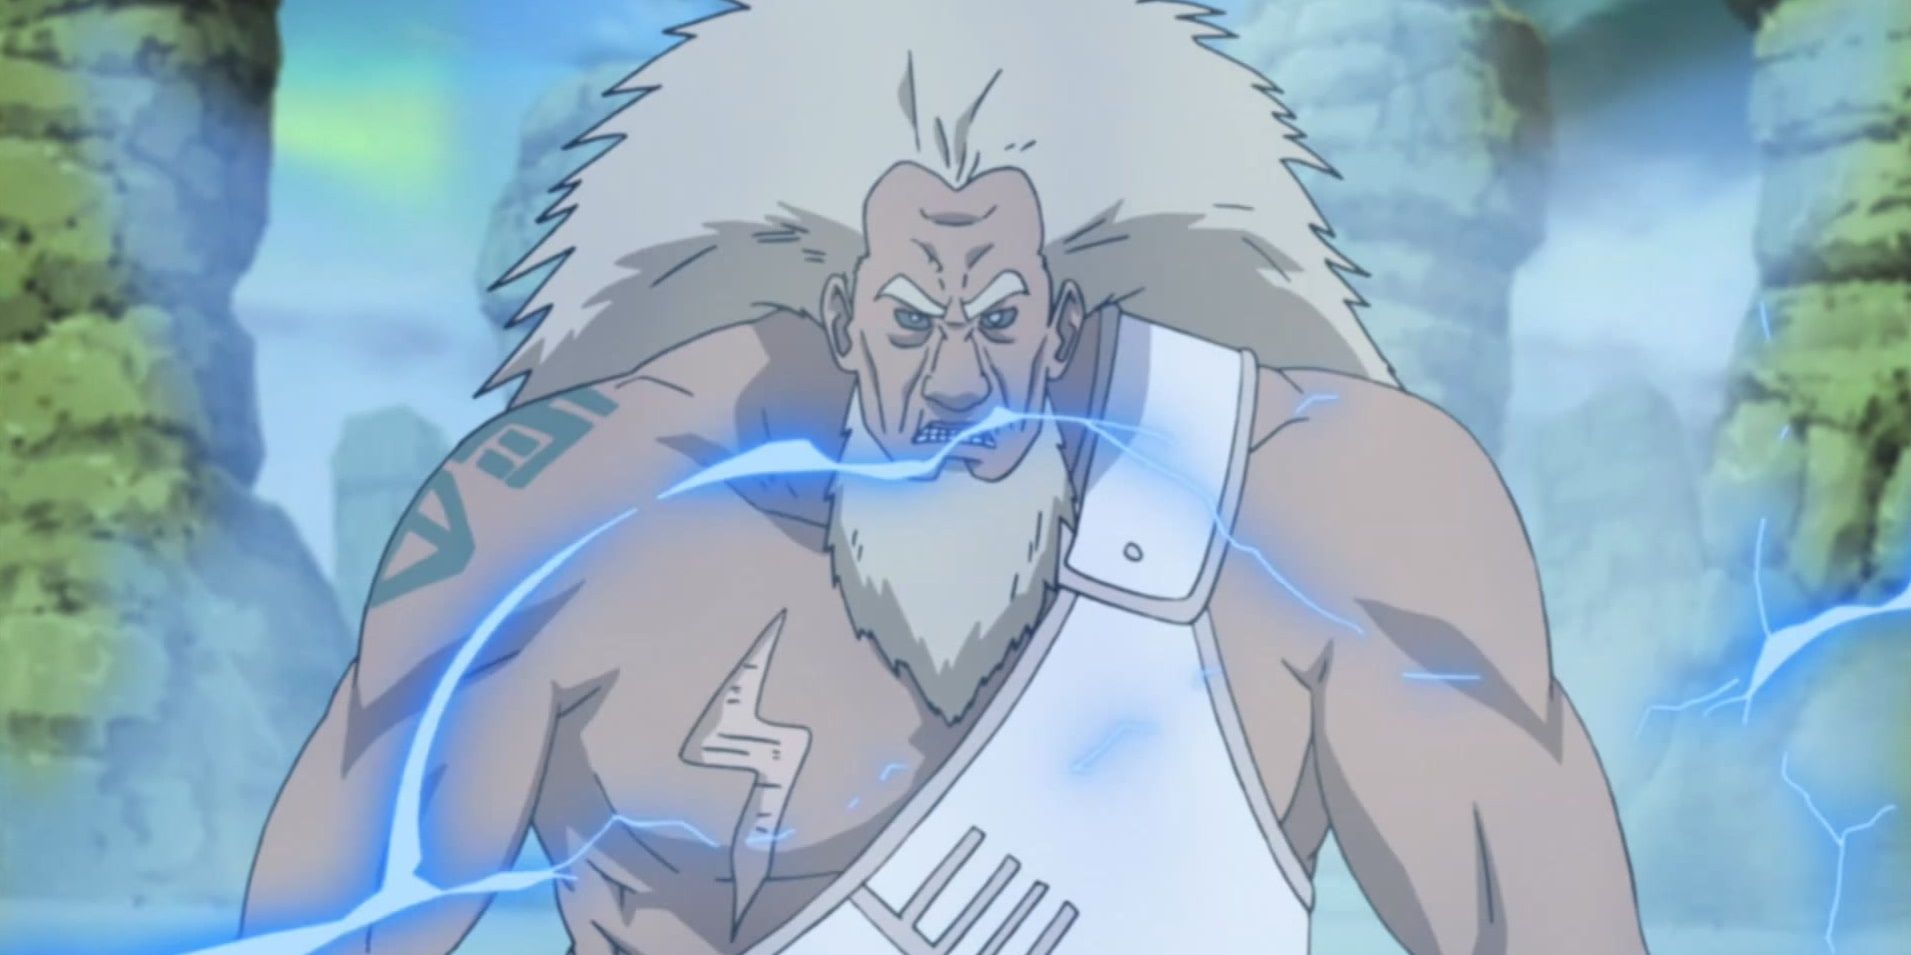 Third raikage using lightning cloak with chest scar in Naruto